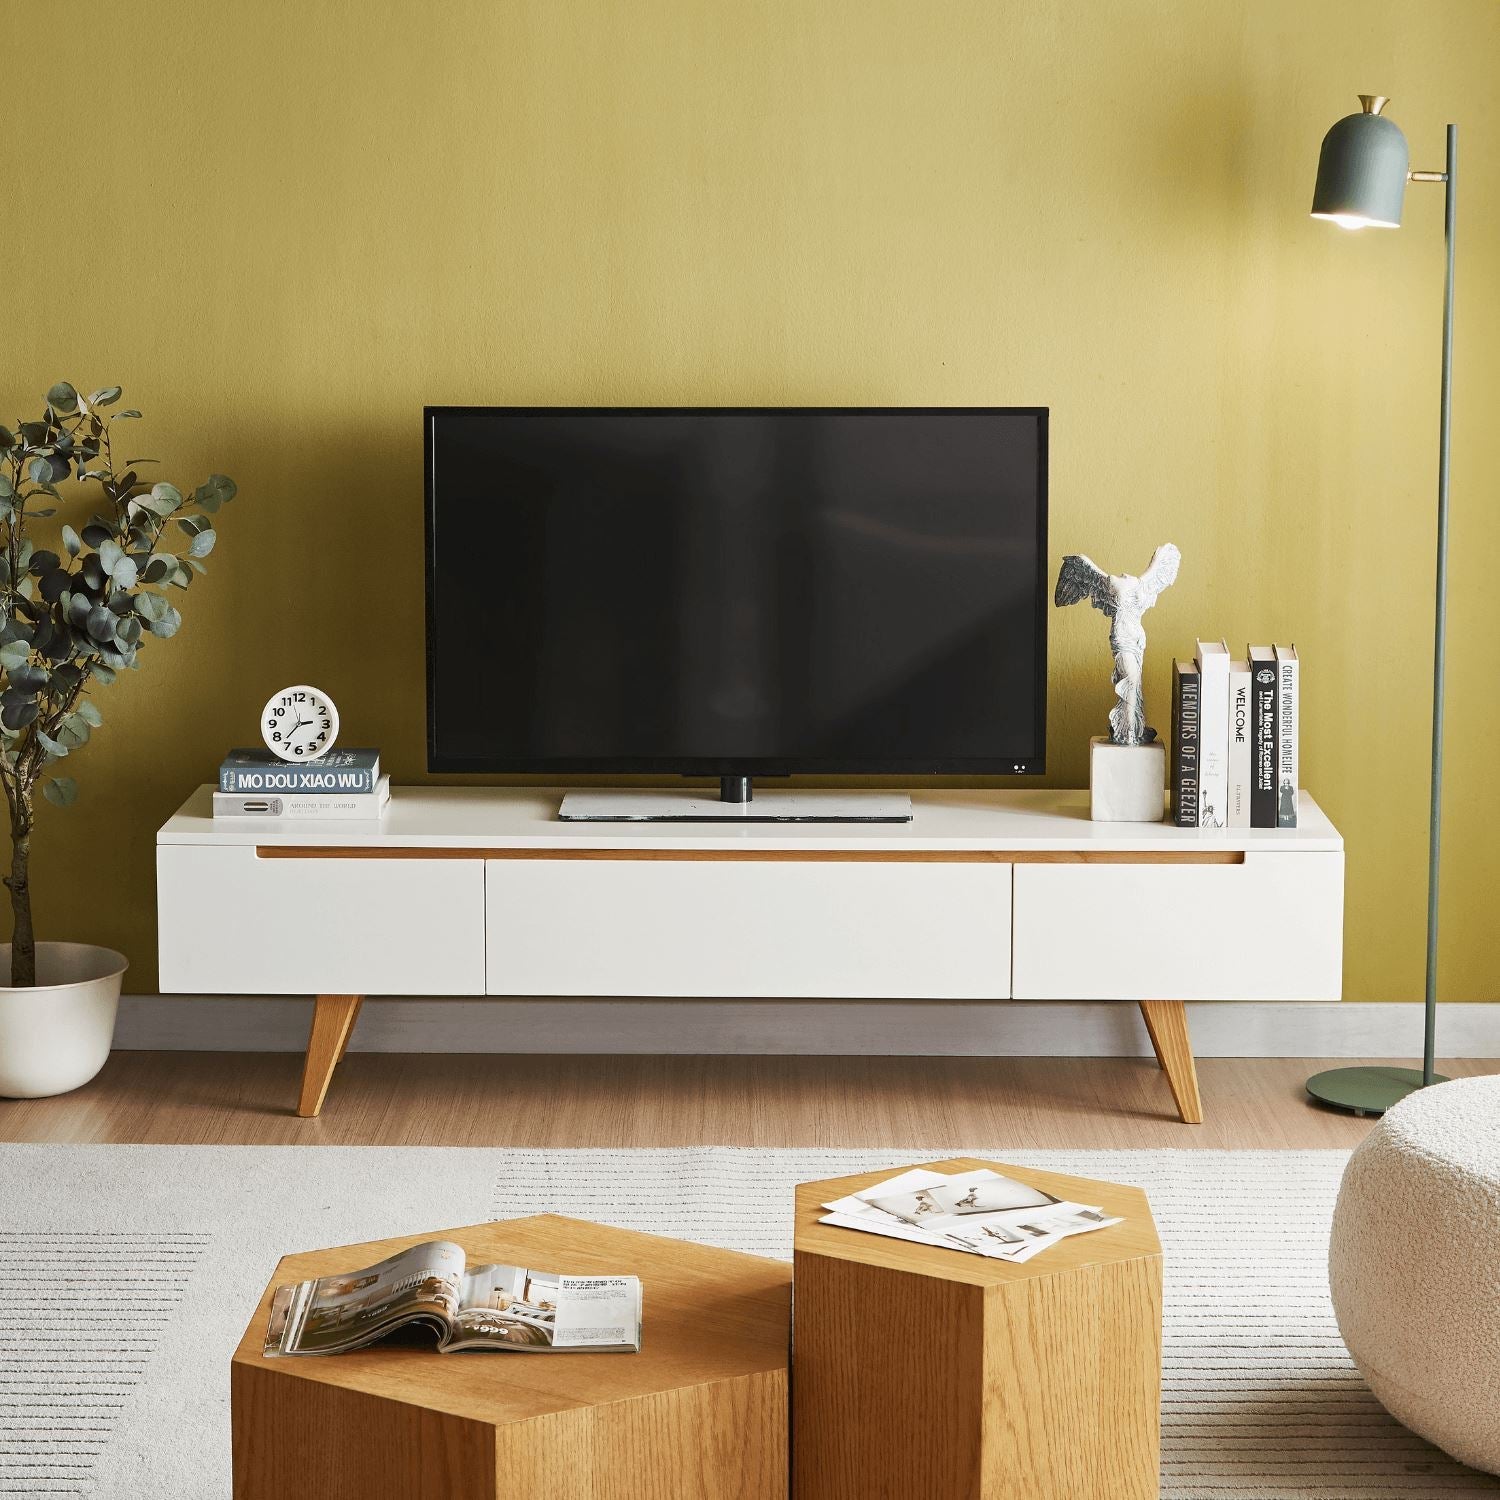 How to Choose a TV Stand